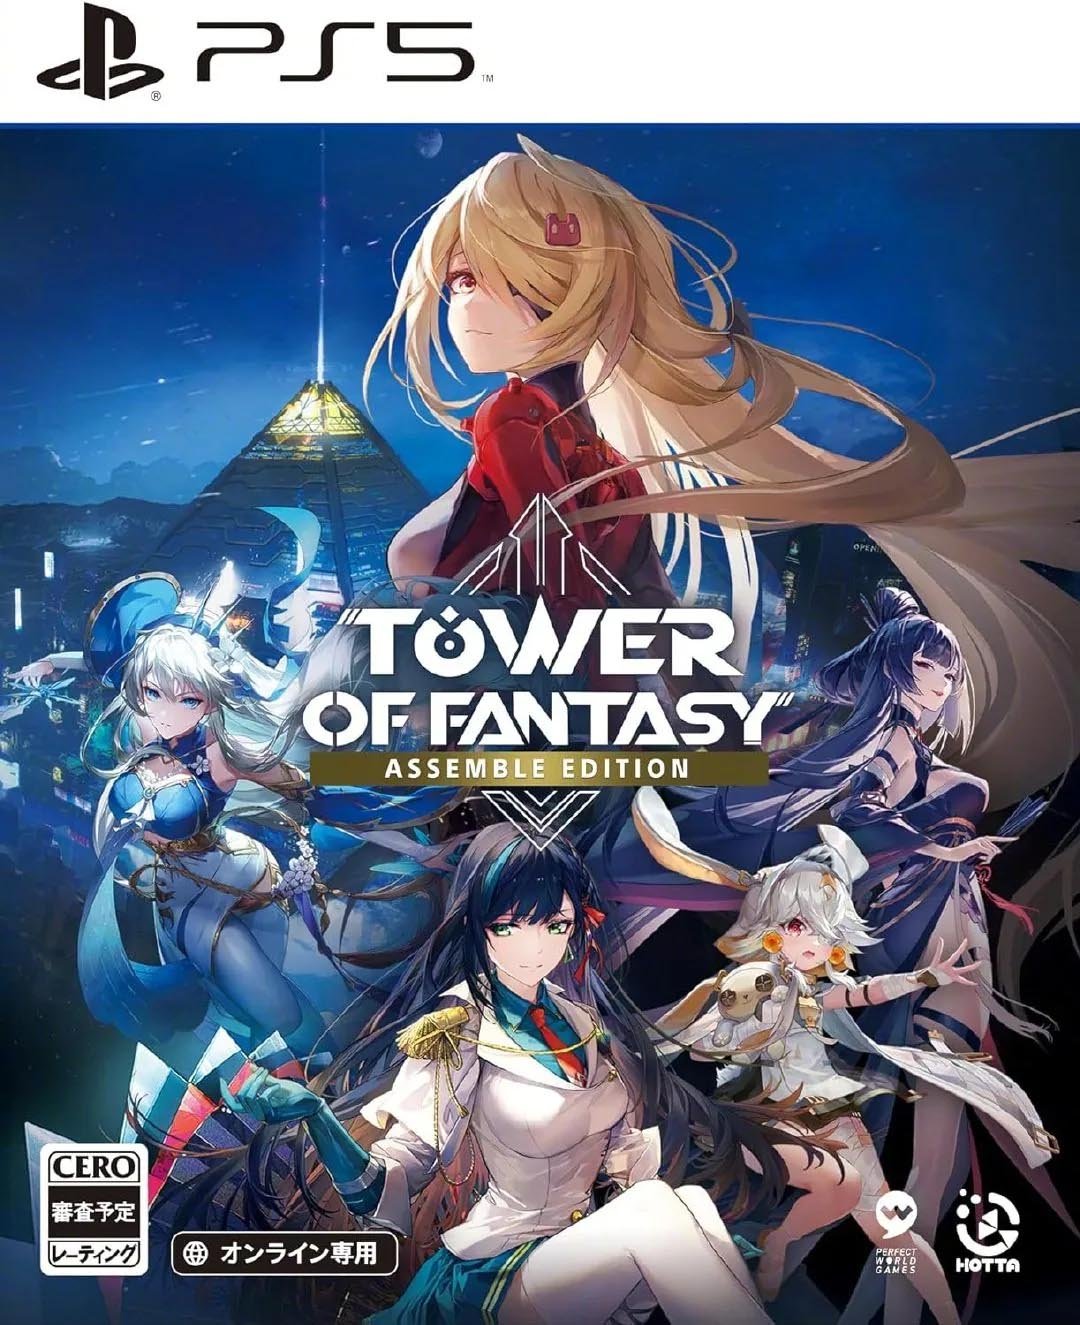 Fantasy Tower Assemble Edition for PS5.jpg